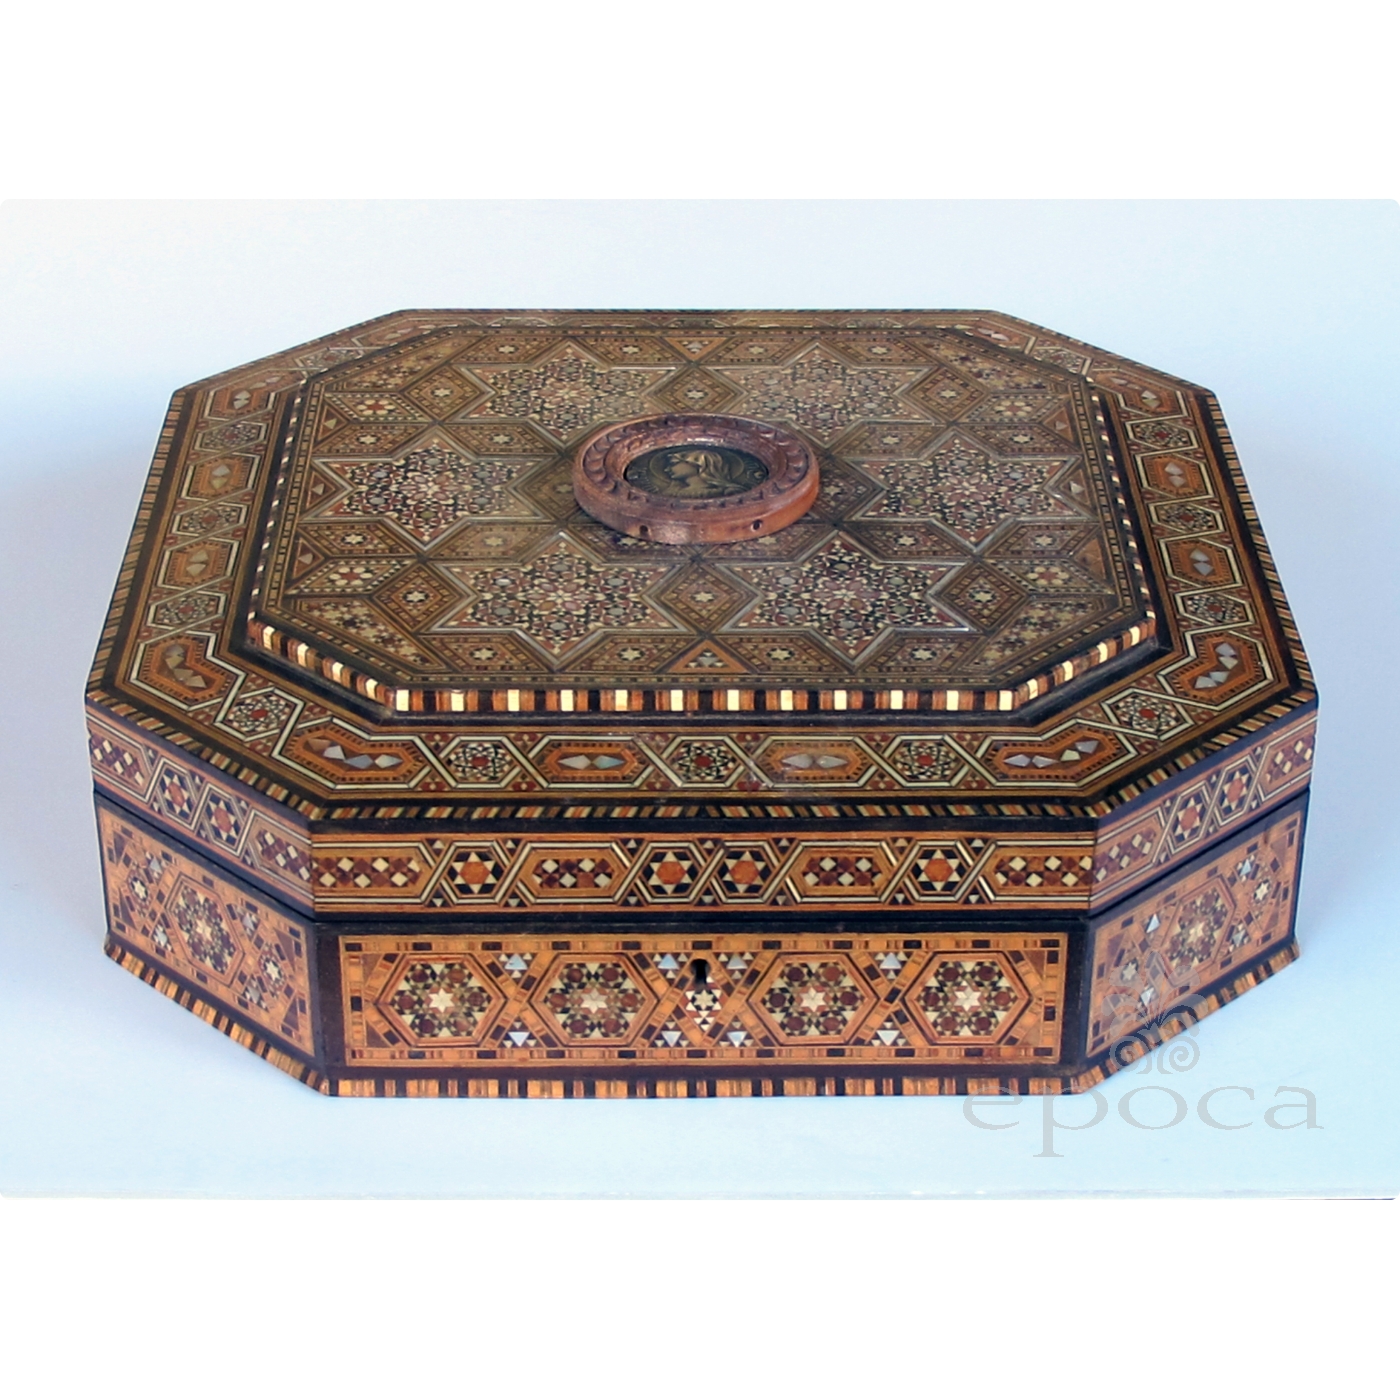 a finely crafted and large middle eastern micro-mosaic marquetry inlaid  octagonal lidded box epoca antiques & 20th century furnishings san francisco